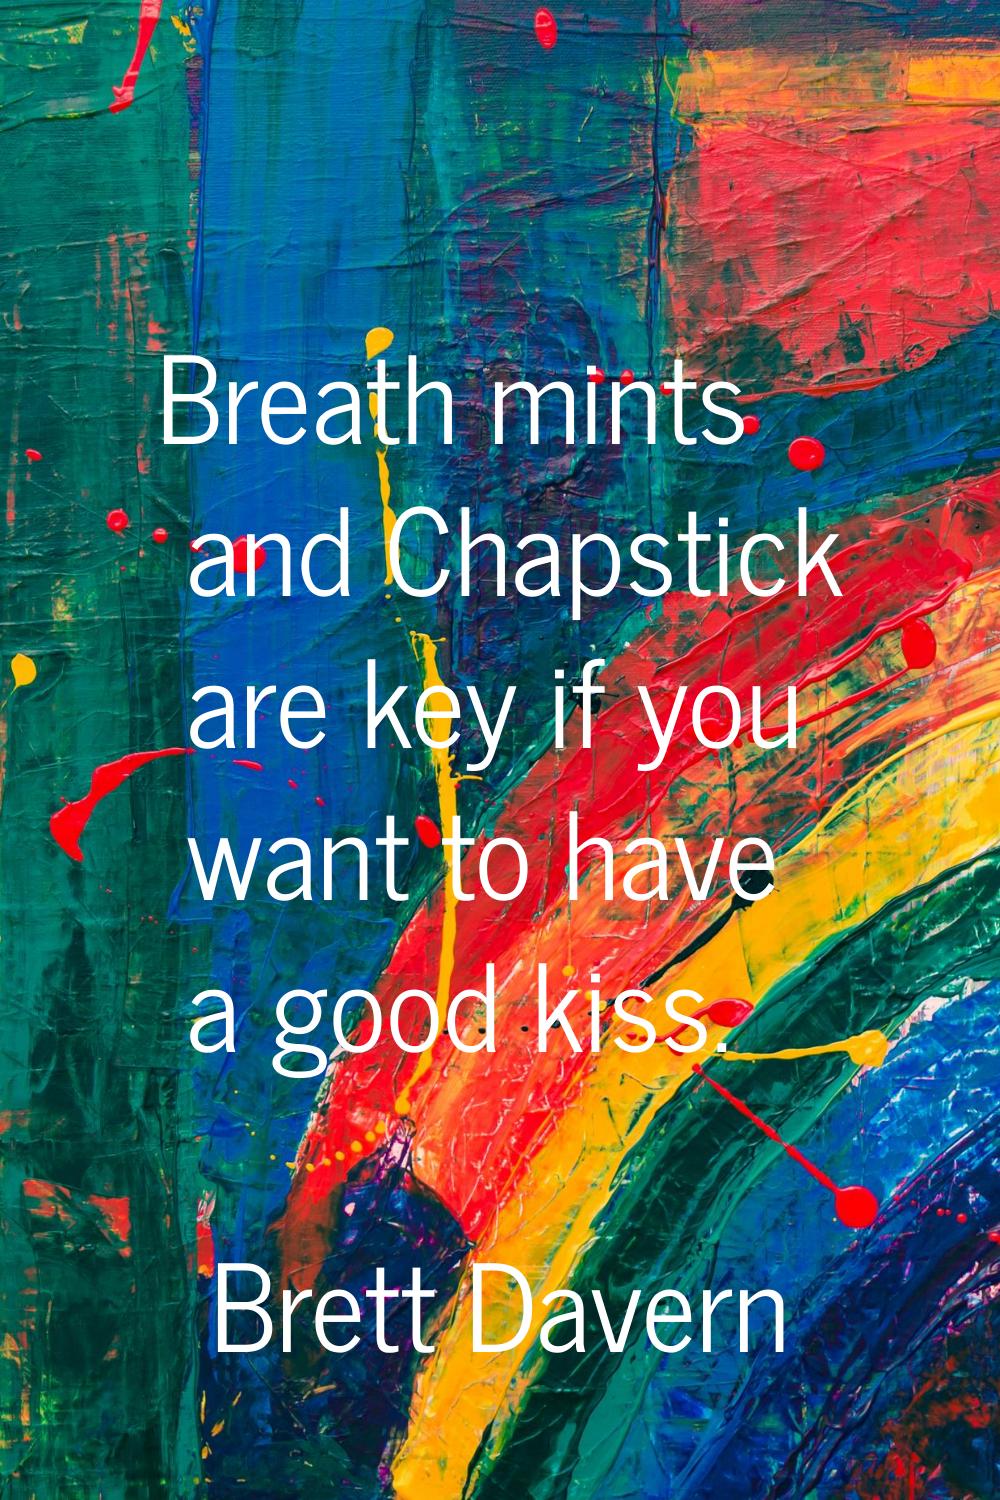 Breath mints and Chapstick are key if you want to have a good kiss.